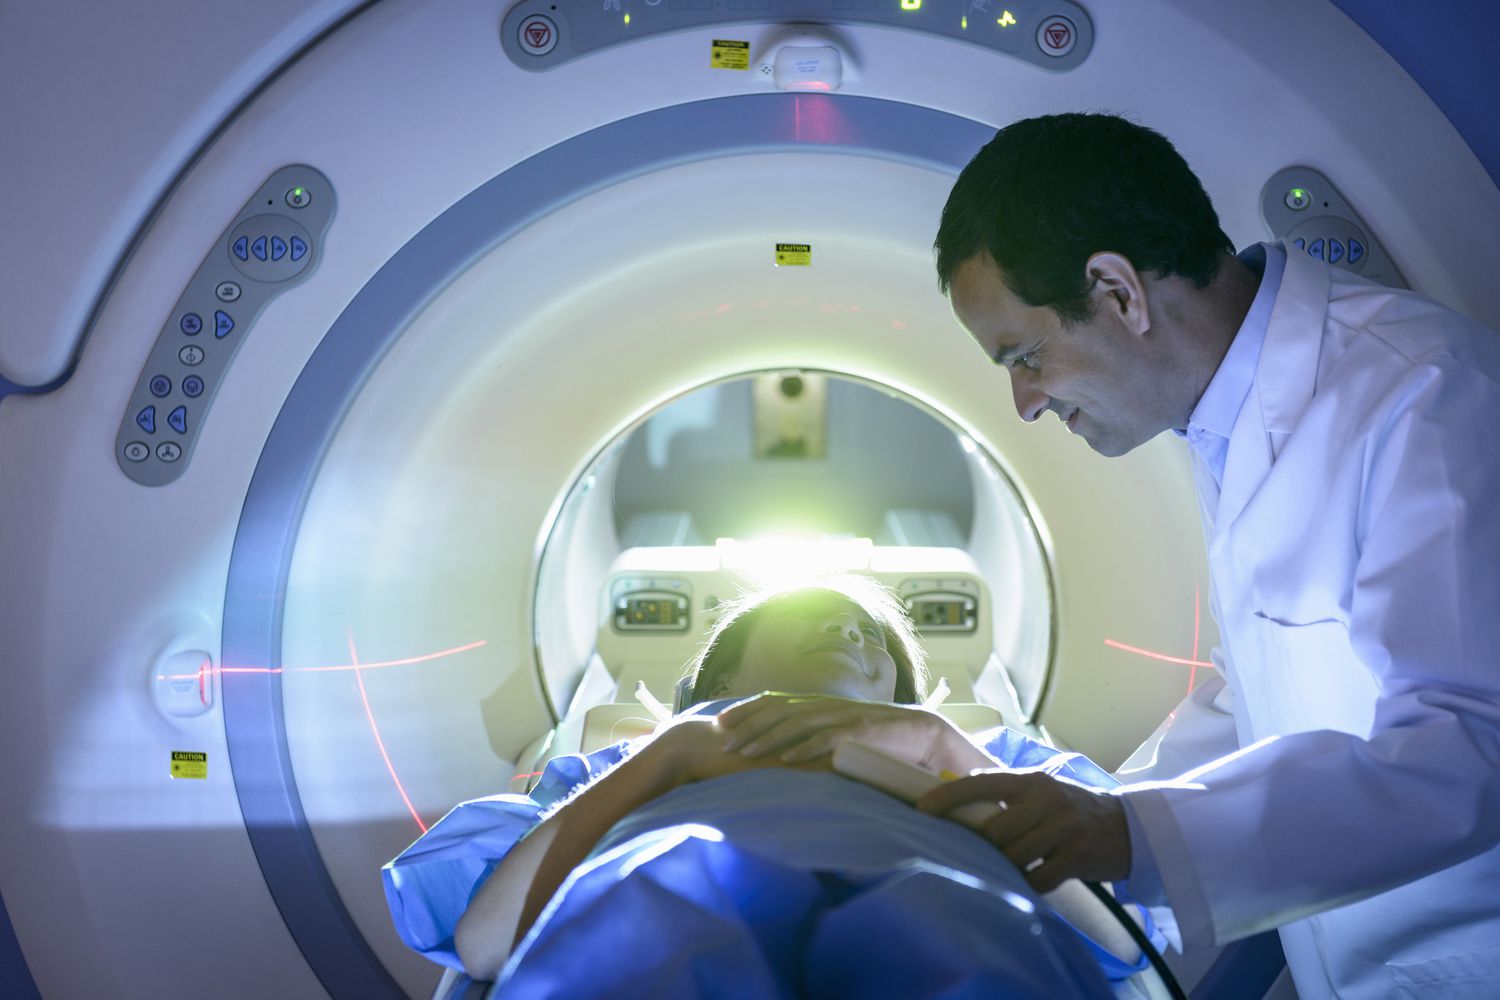 .S. Imaging Services Market is estimated to be valued at US$ 146.7 Bn in 2022 and is expected to exhibit a CAGR of 5.50% over the forecast period 2023-2030